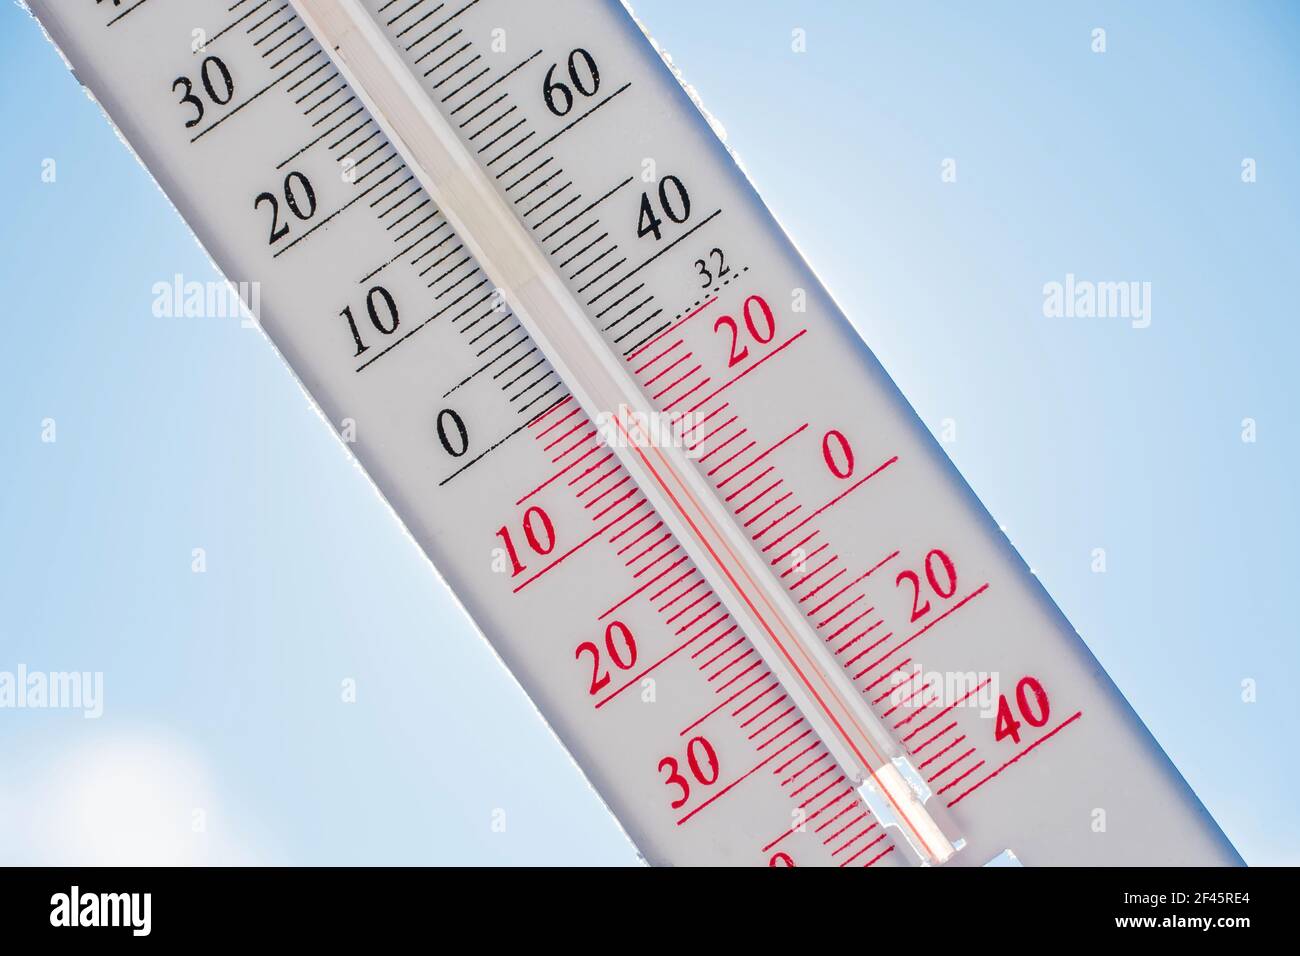 https://c8.alamy.com/comp/2F45RE4/the-thermometer-lies-on-the-snow-and-shows-a-negative-temperature-in-cold-weather-on-the-blue-skymeteorological-conditions-with-low-air-and-ambient-t-2F45RE4.jpg